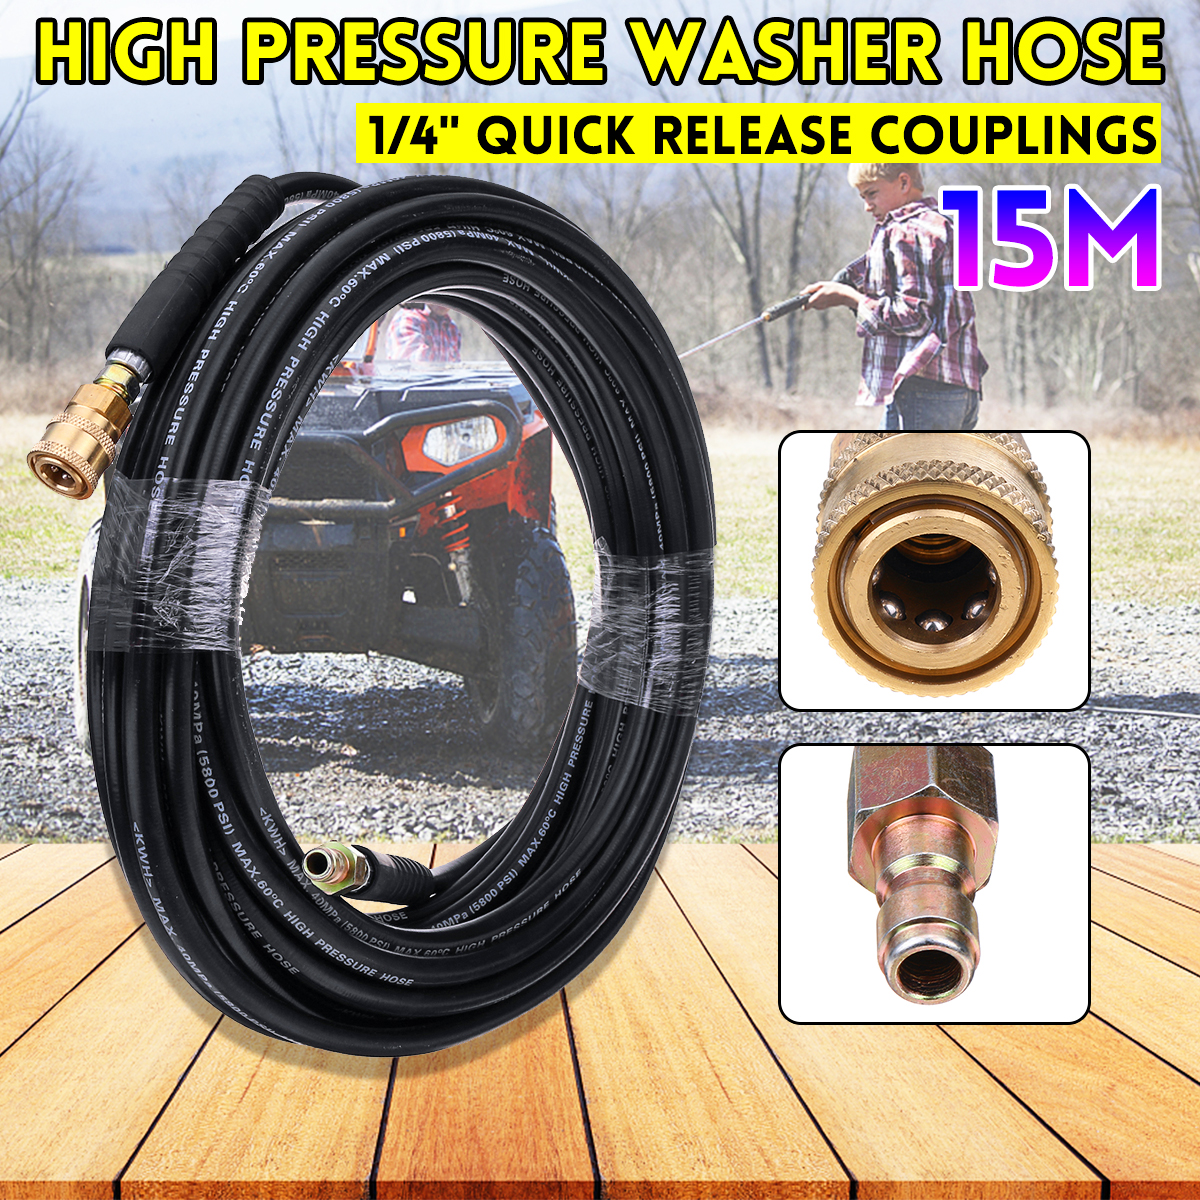 15M-40MPa-High-Pressure-Washer-Cleaning-Hose-14-Inch-Quick-Release-Couplings-Garden-Washing-Tools-Co-1570347-1